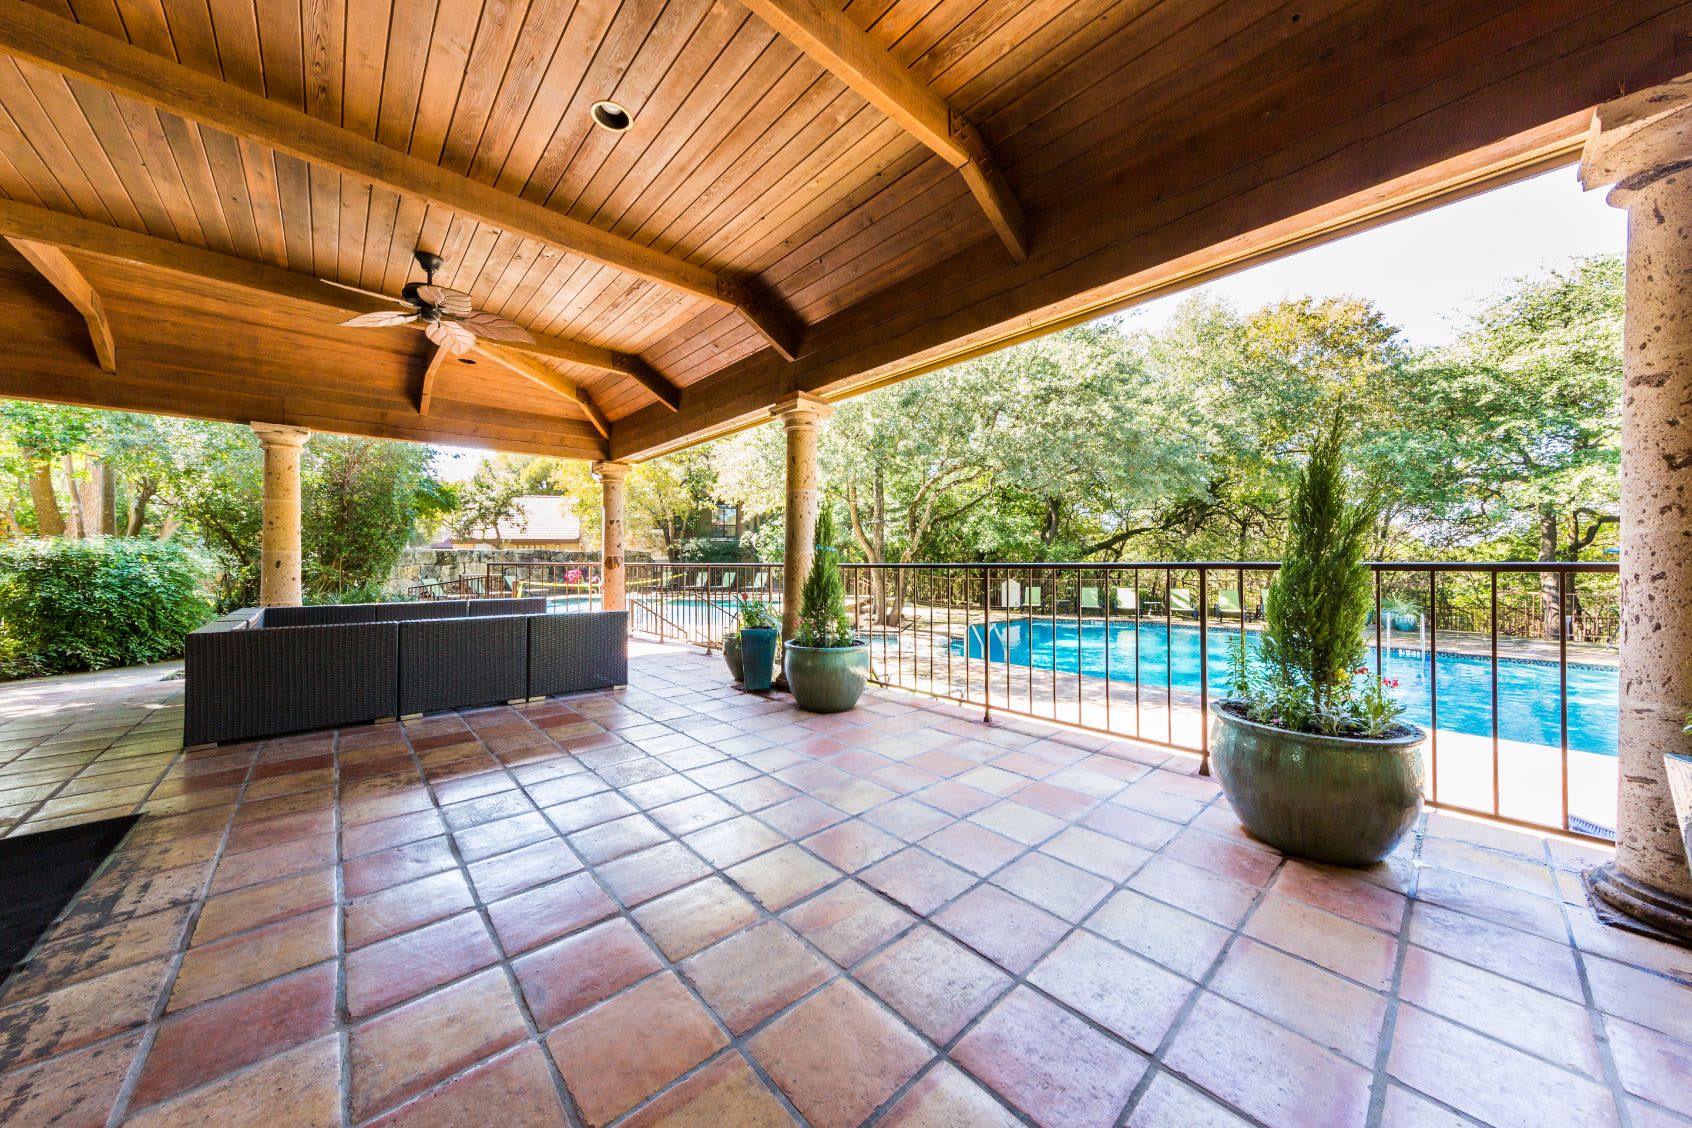 Large gazebo by pool at Marquis at Caprock Canyon in Austin, Texas